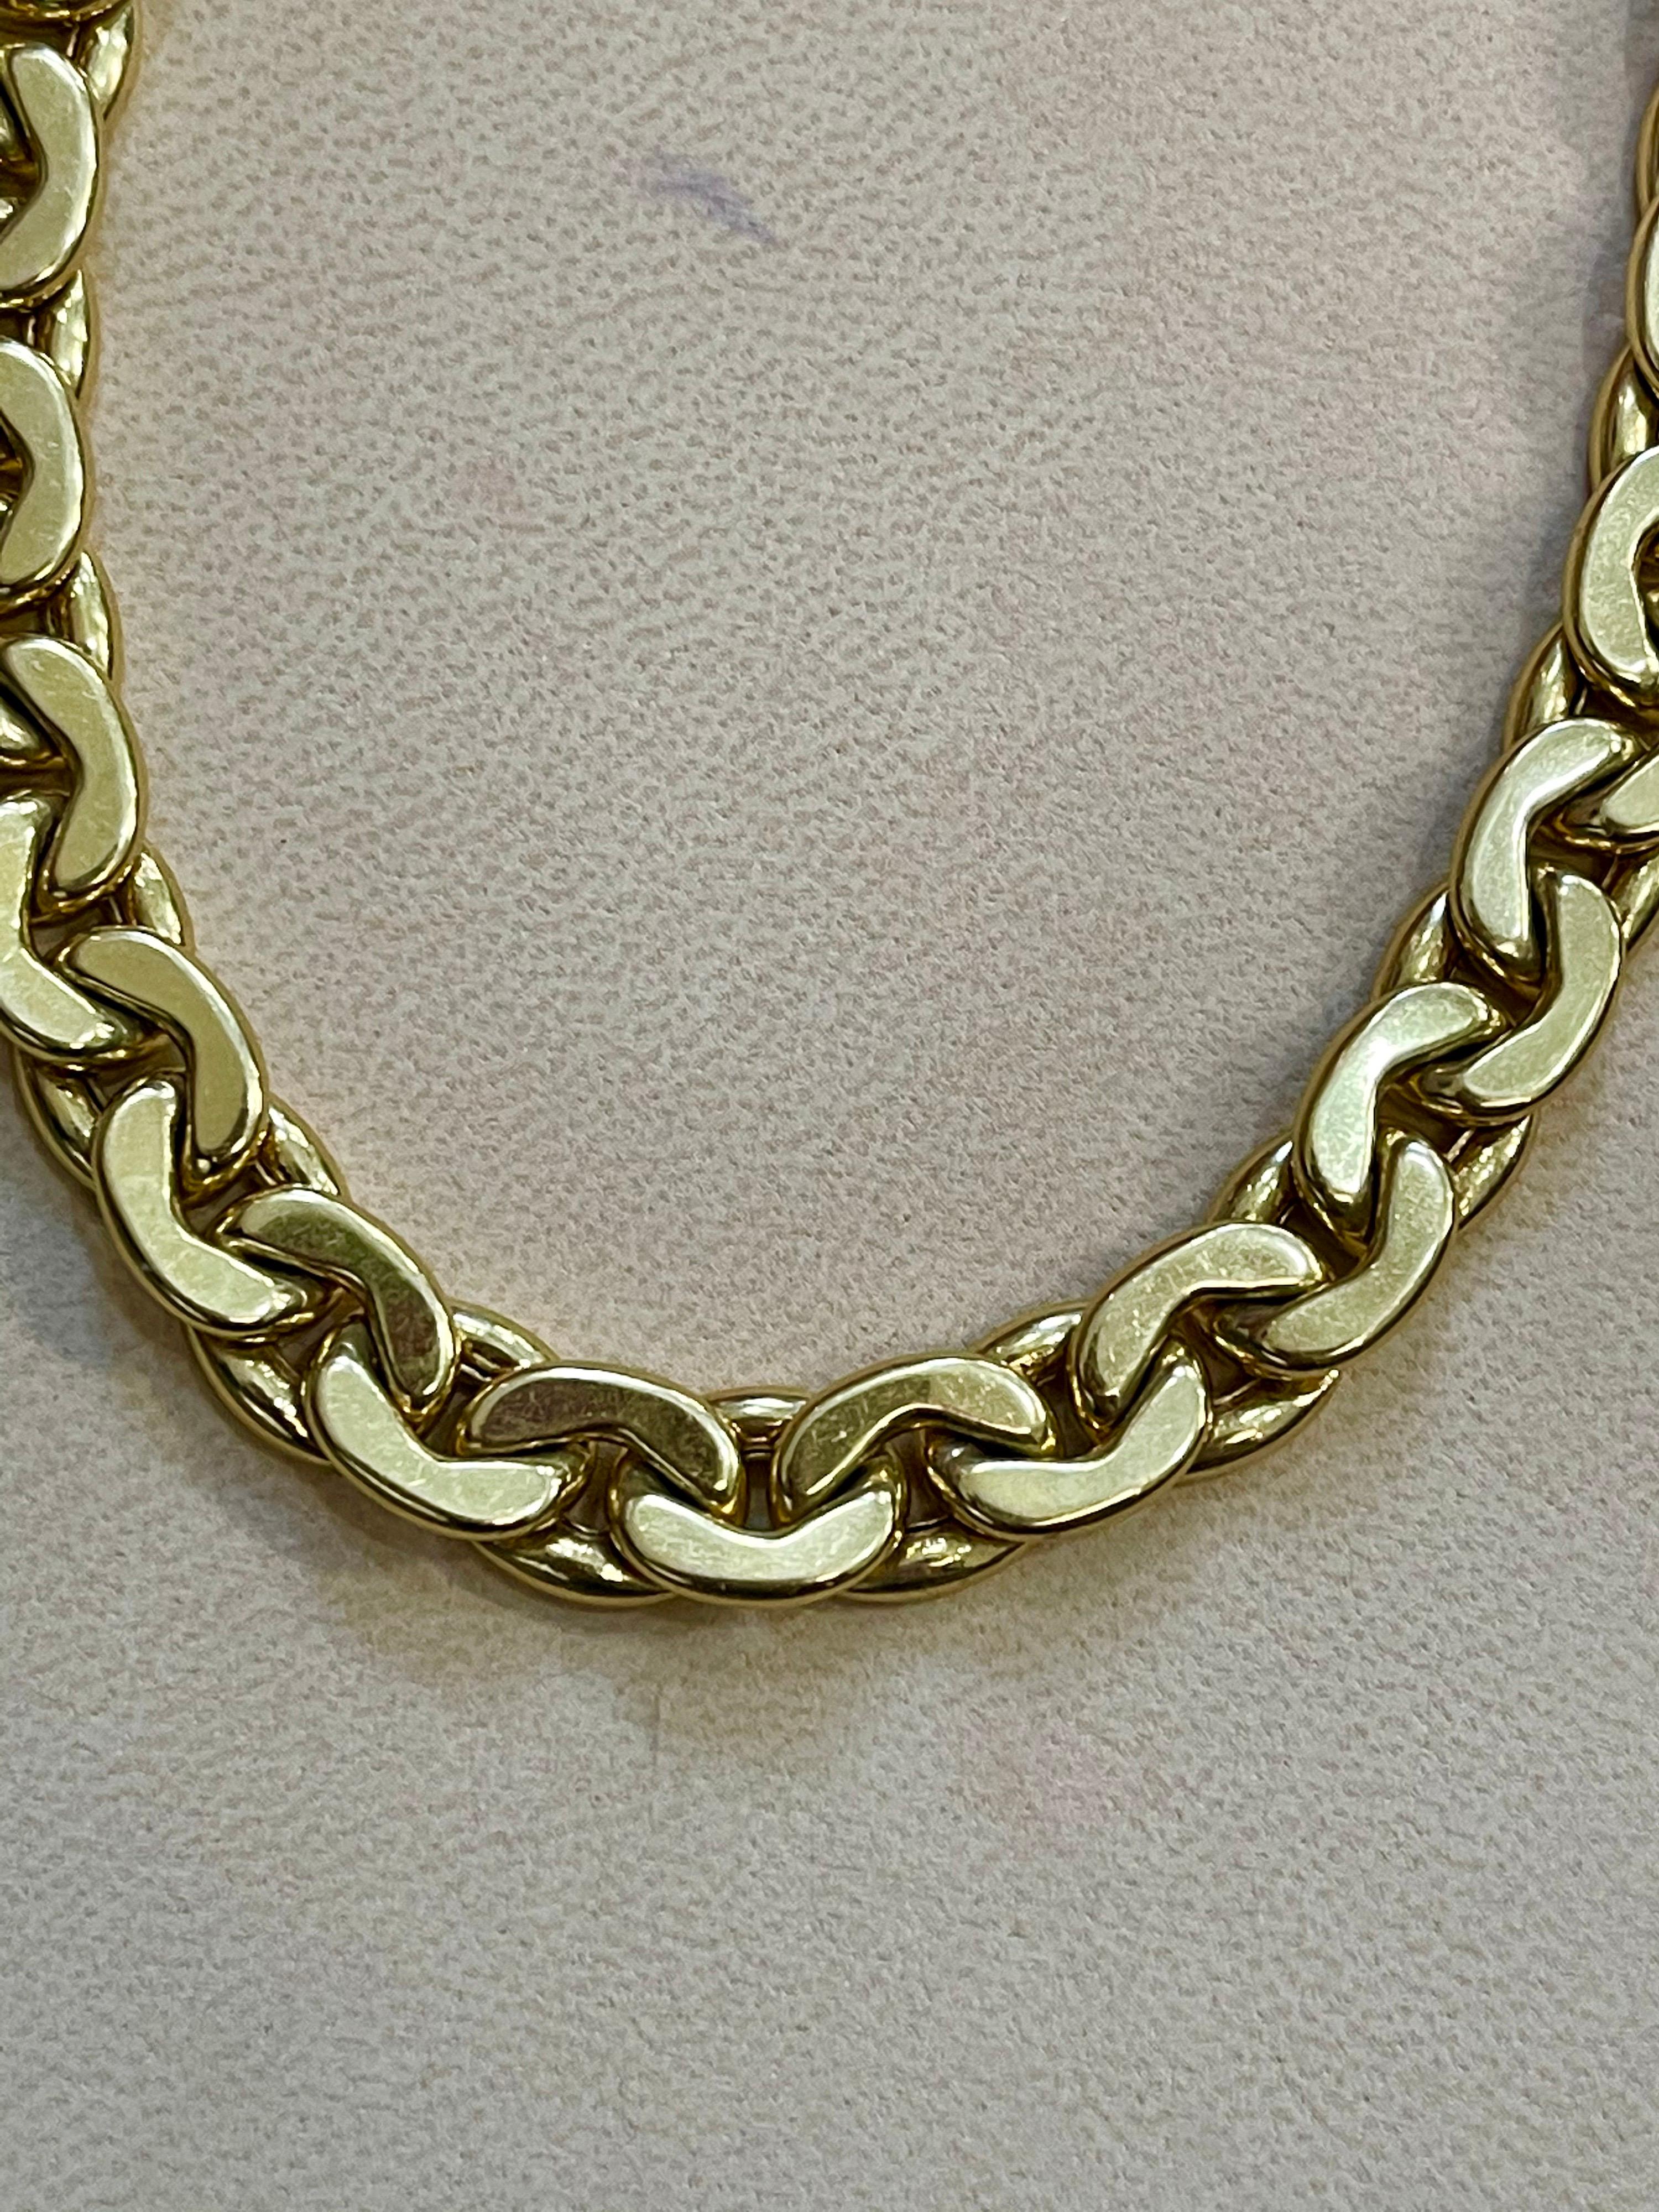  Link Necklace 18 Karat Yellow Gold 56.5 Gm,  Unisex , 18 Inch Long
18-19 Inches long Necklace
Beautiful link design Necklace 
Weight of the Necklace is 56.5   Grams 
Please look at all the pictures
Its very hard to capture the true color and luster